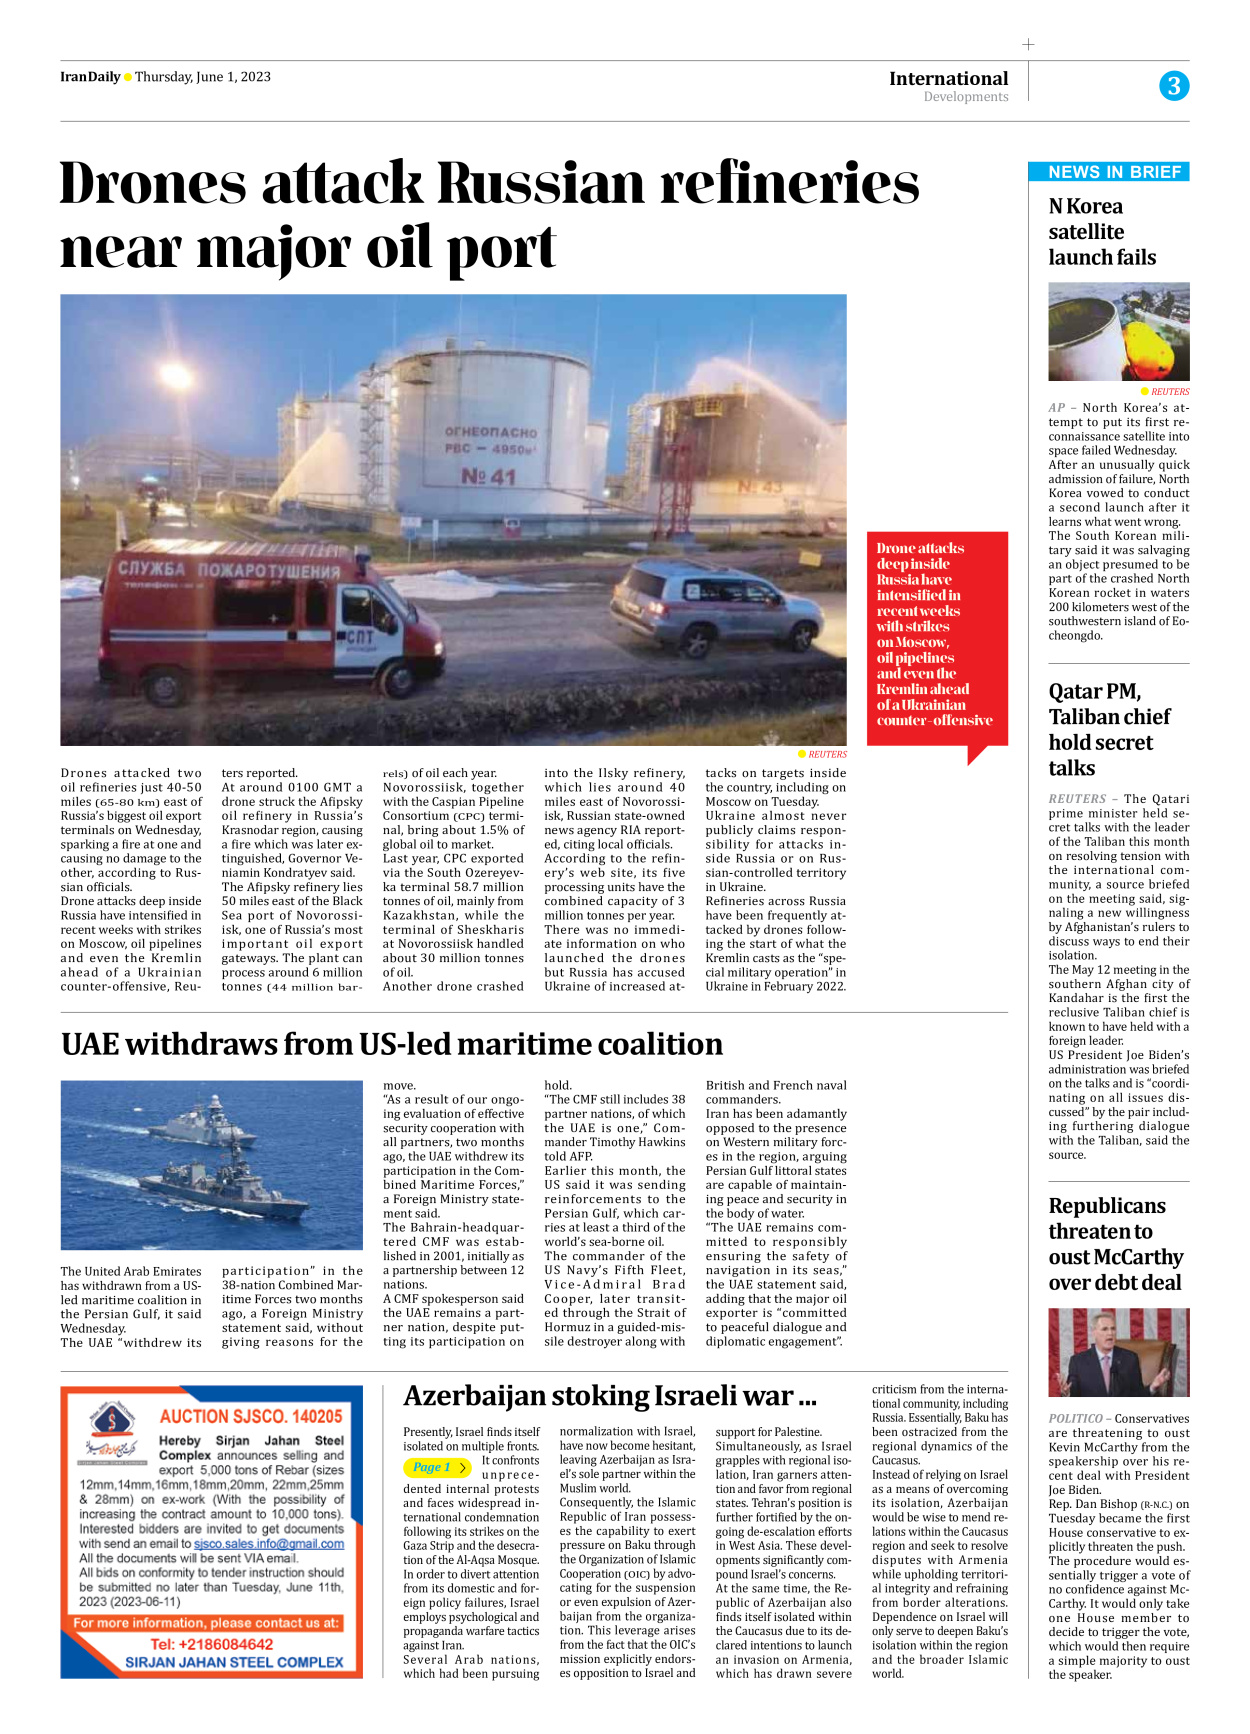 Iran Daily - Number Seven Thousand Three Hundred and Six - 01 June 2023 - Page 3